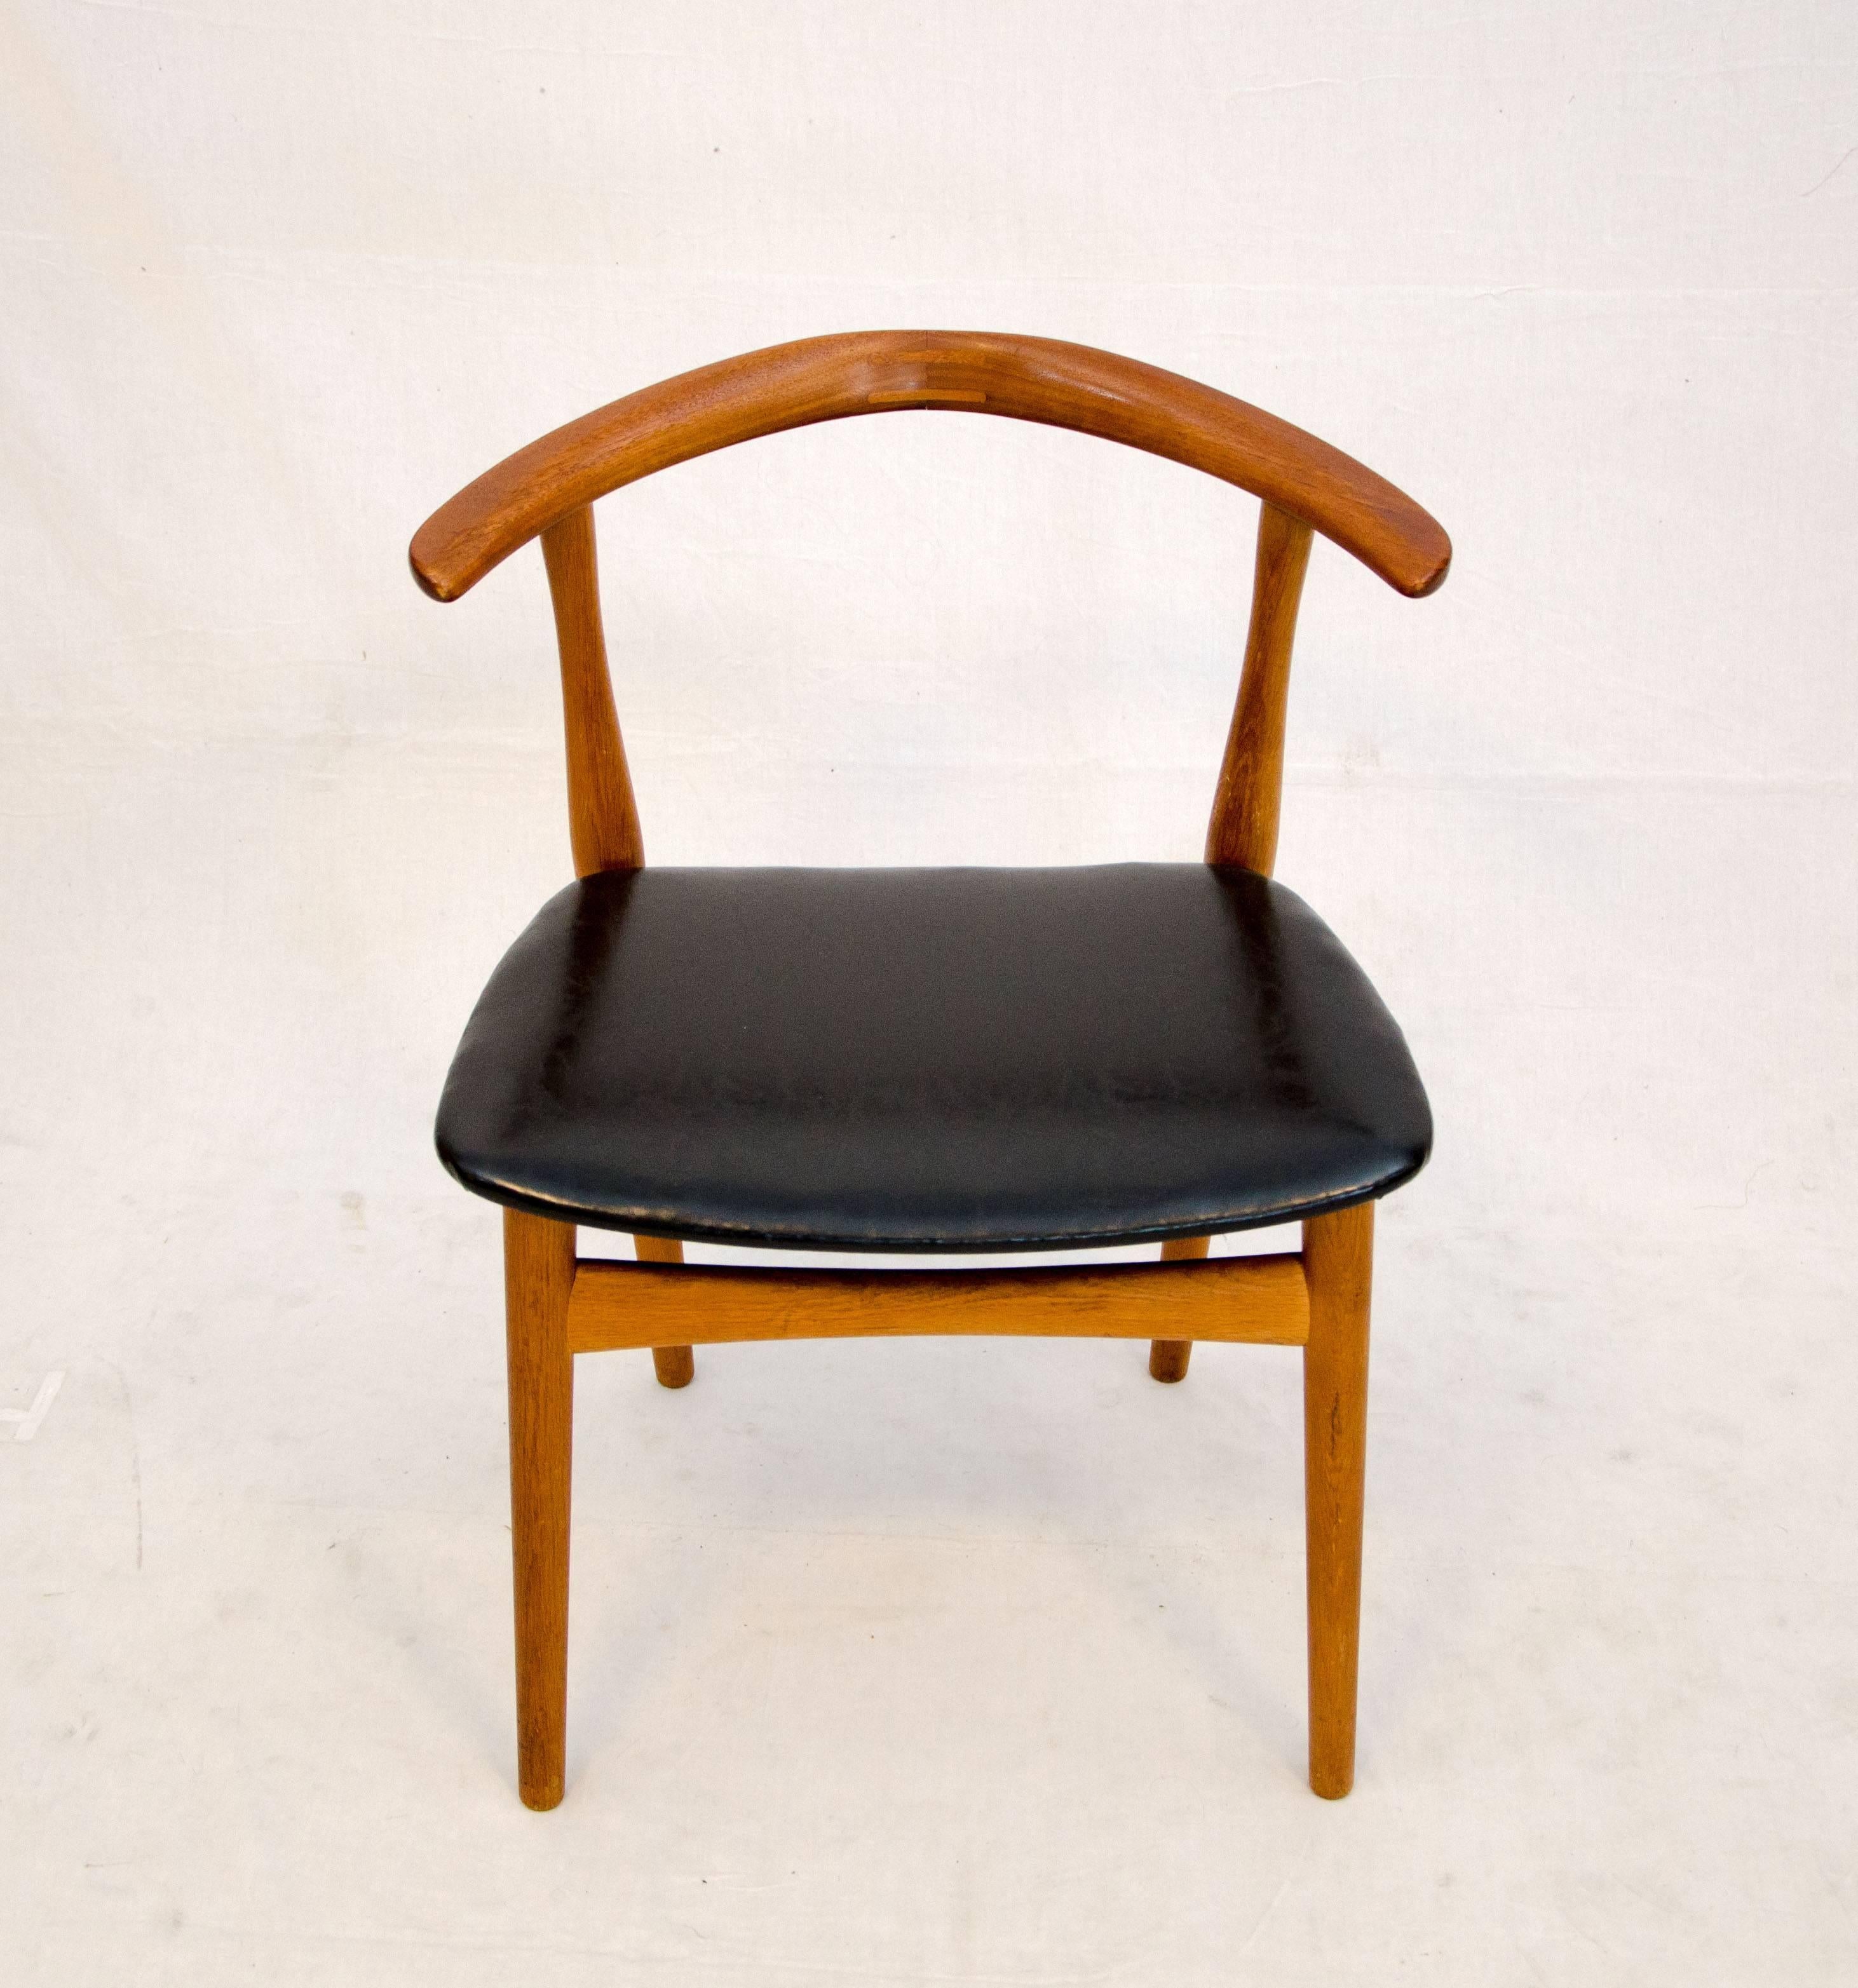 Unusual Danish teak chair designed by Architekt Kjærnulf and manufactured by Bruno Hansen The center of the contoured back is accented by inlaid joinery. The chair has designer and manufacturer marks as pictured. It would be an excellent desk or